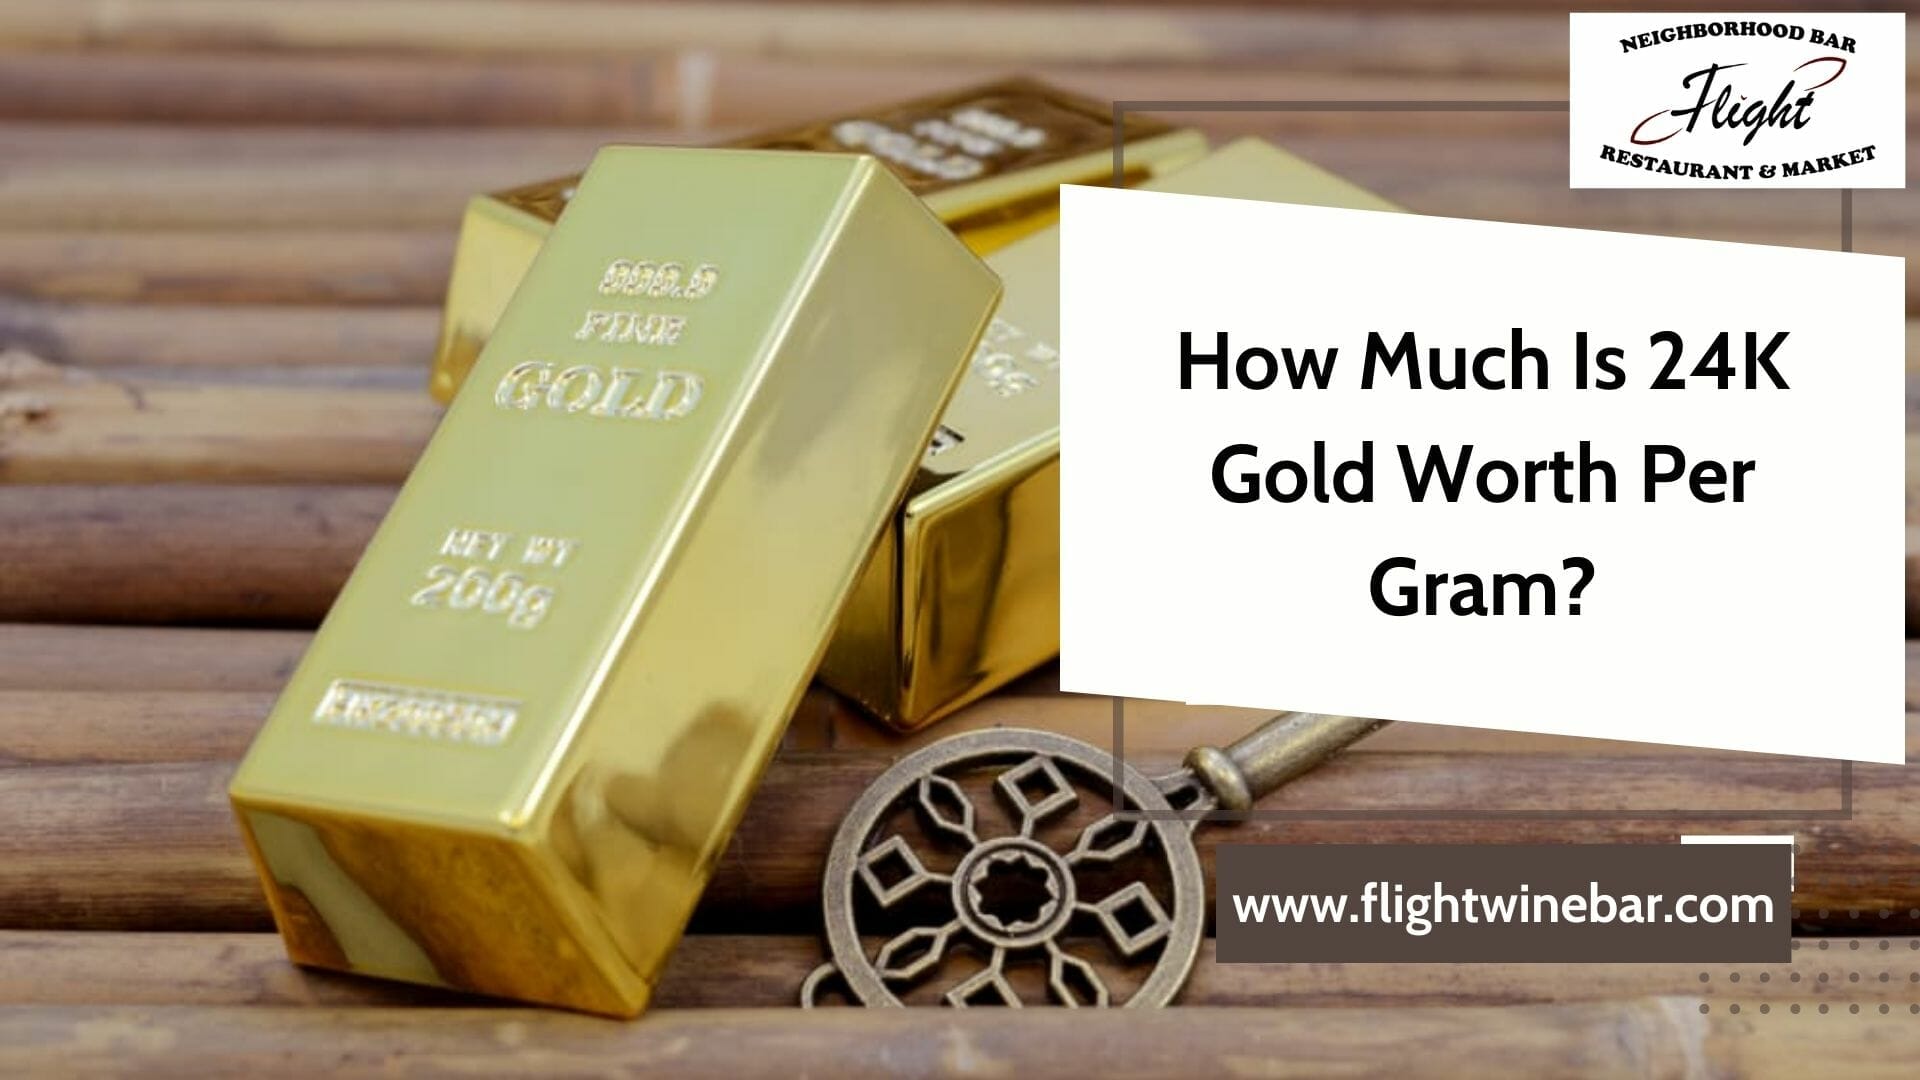 How Much Is 24K Gold Worth Per Gram